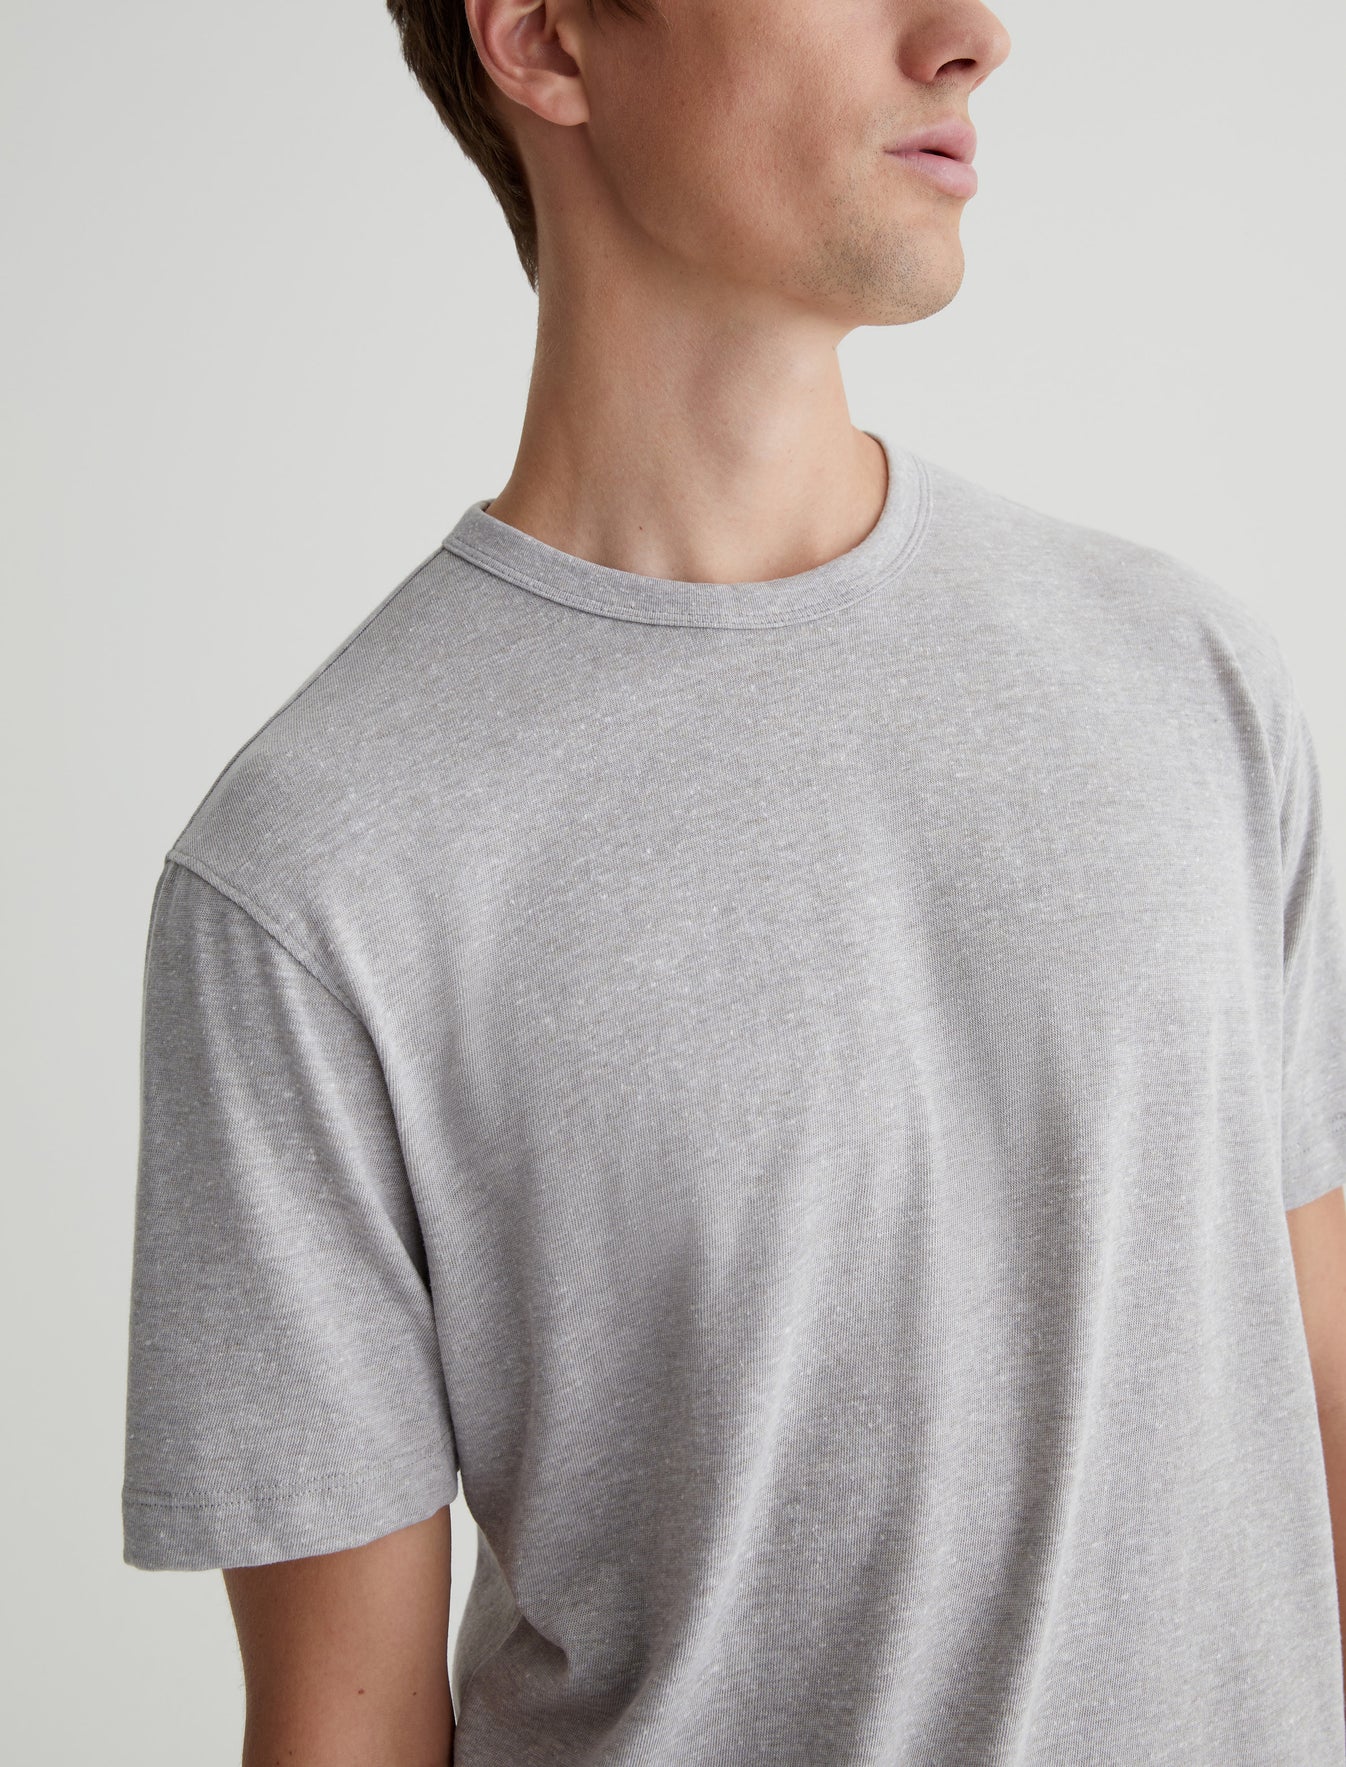 Wesley Crew Heather Grey Relaxed T-Shirt Men Top Photo 2